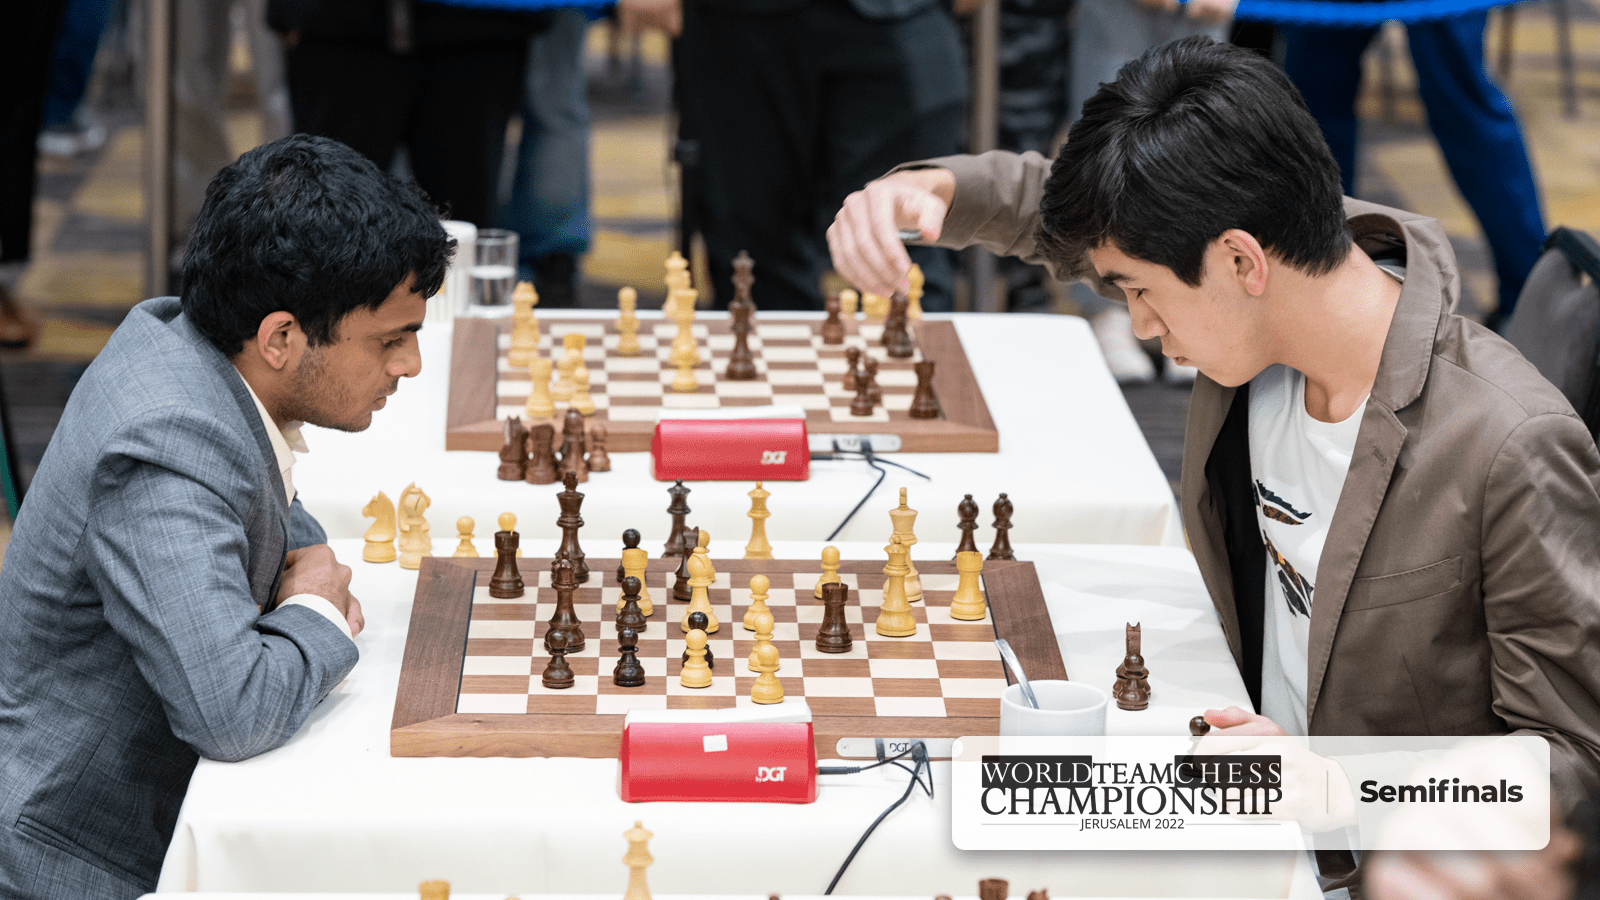 China, Uzbekistan To Play For Gold In World Team Chess Championship